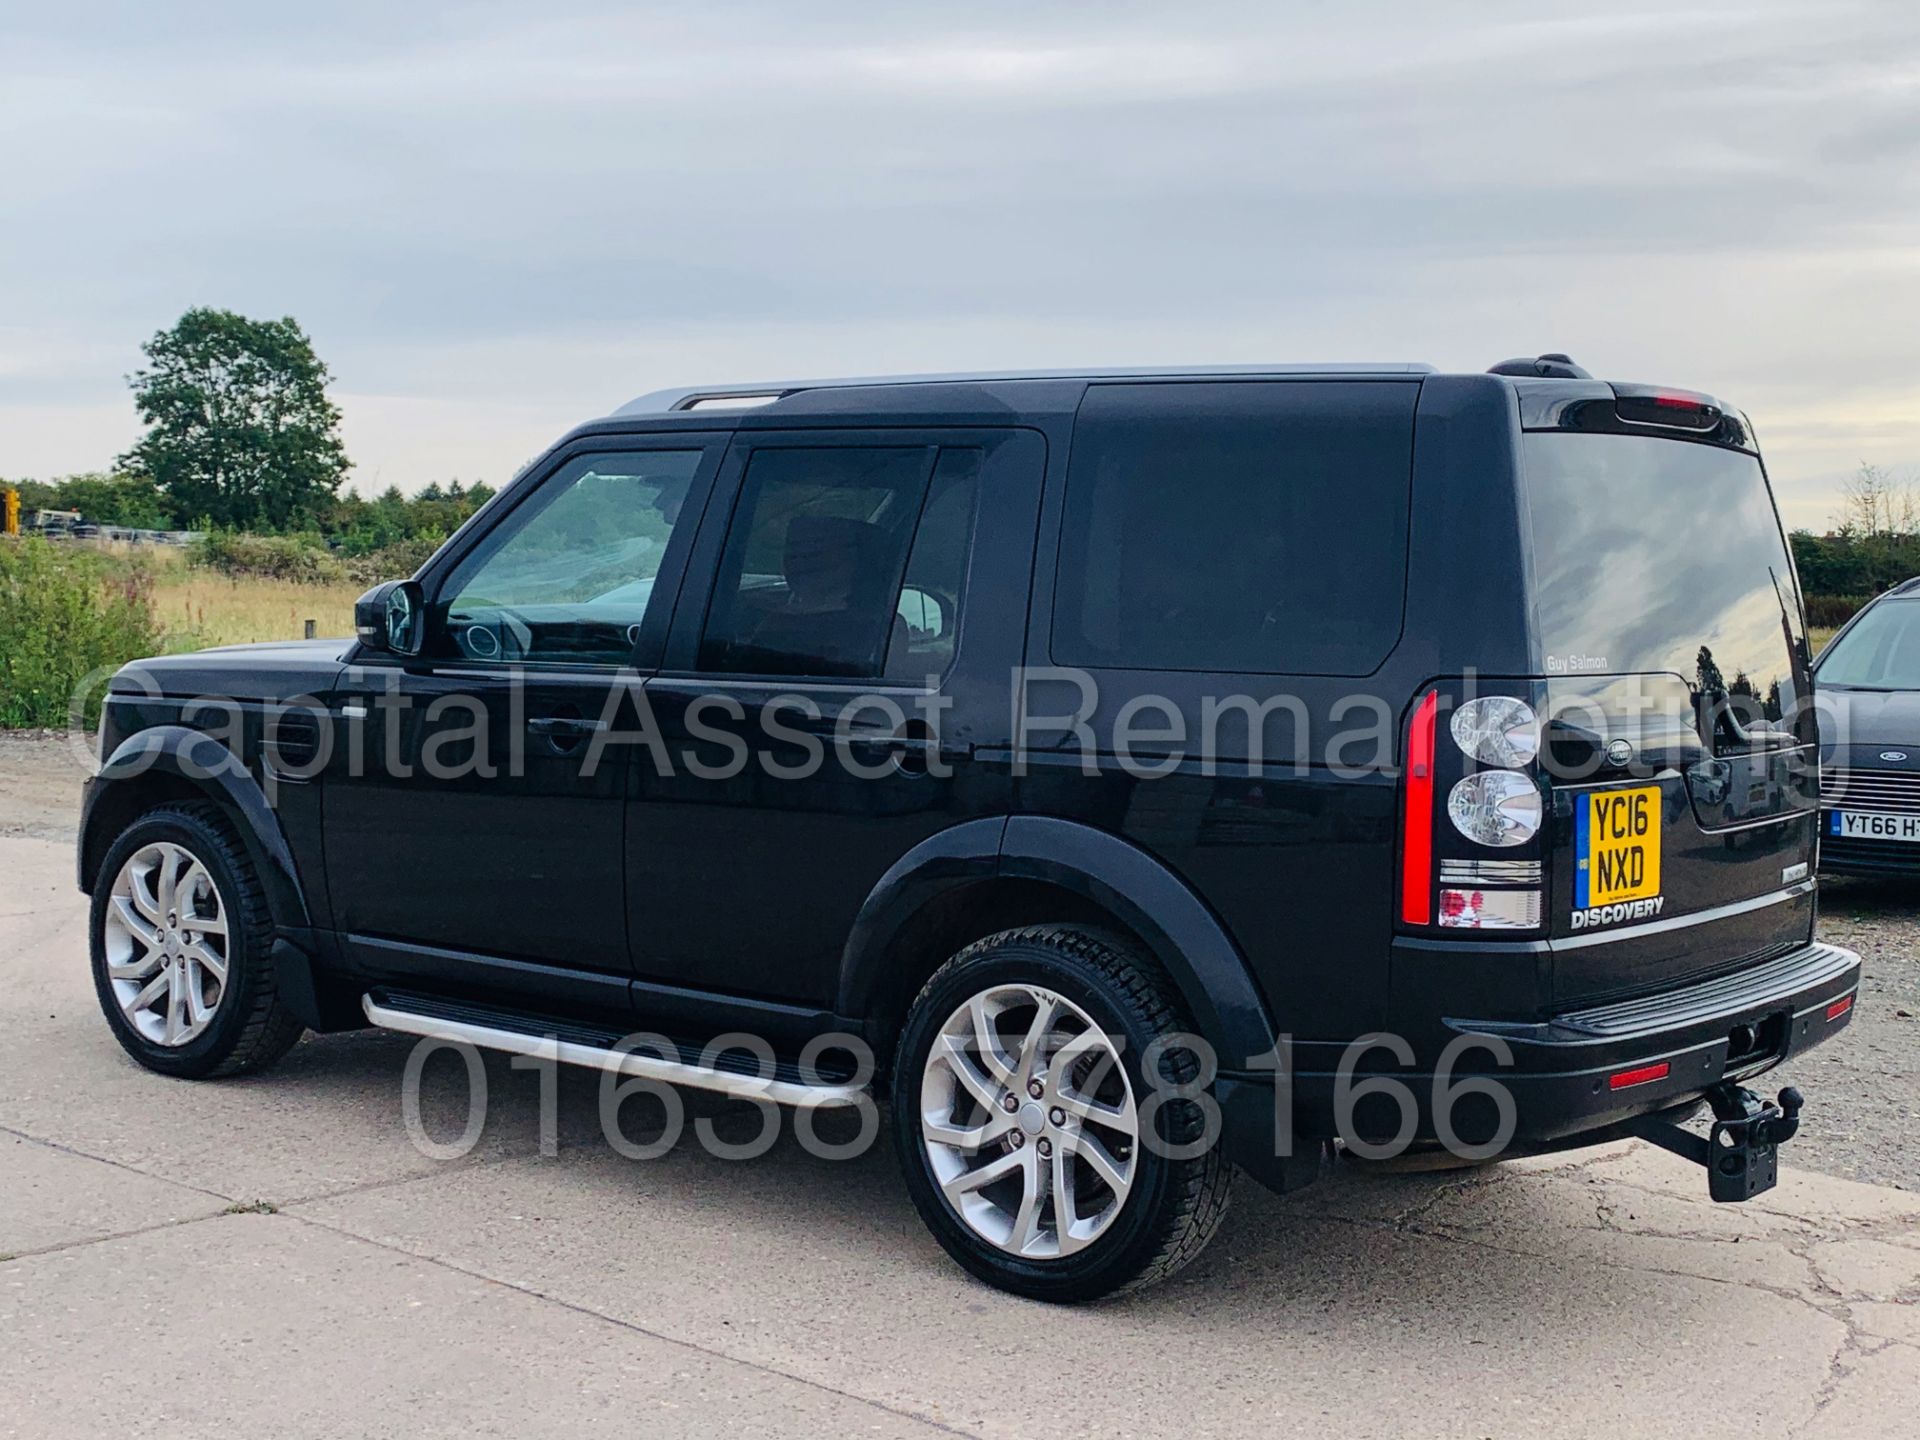 (On Sale) LAND ROVER DISCOVERY 4 *LANDMARK* 7 SEATER SUV (2016) '3.0 SDV6 - 8 SPEED AUTO' (1 OWNER) - Image 9 of 65